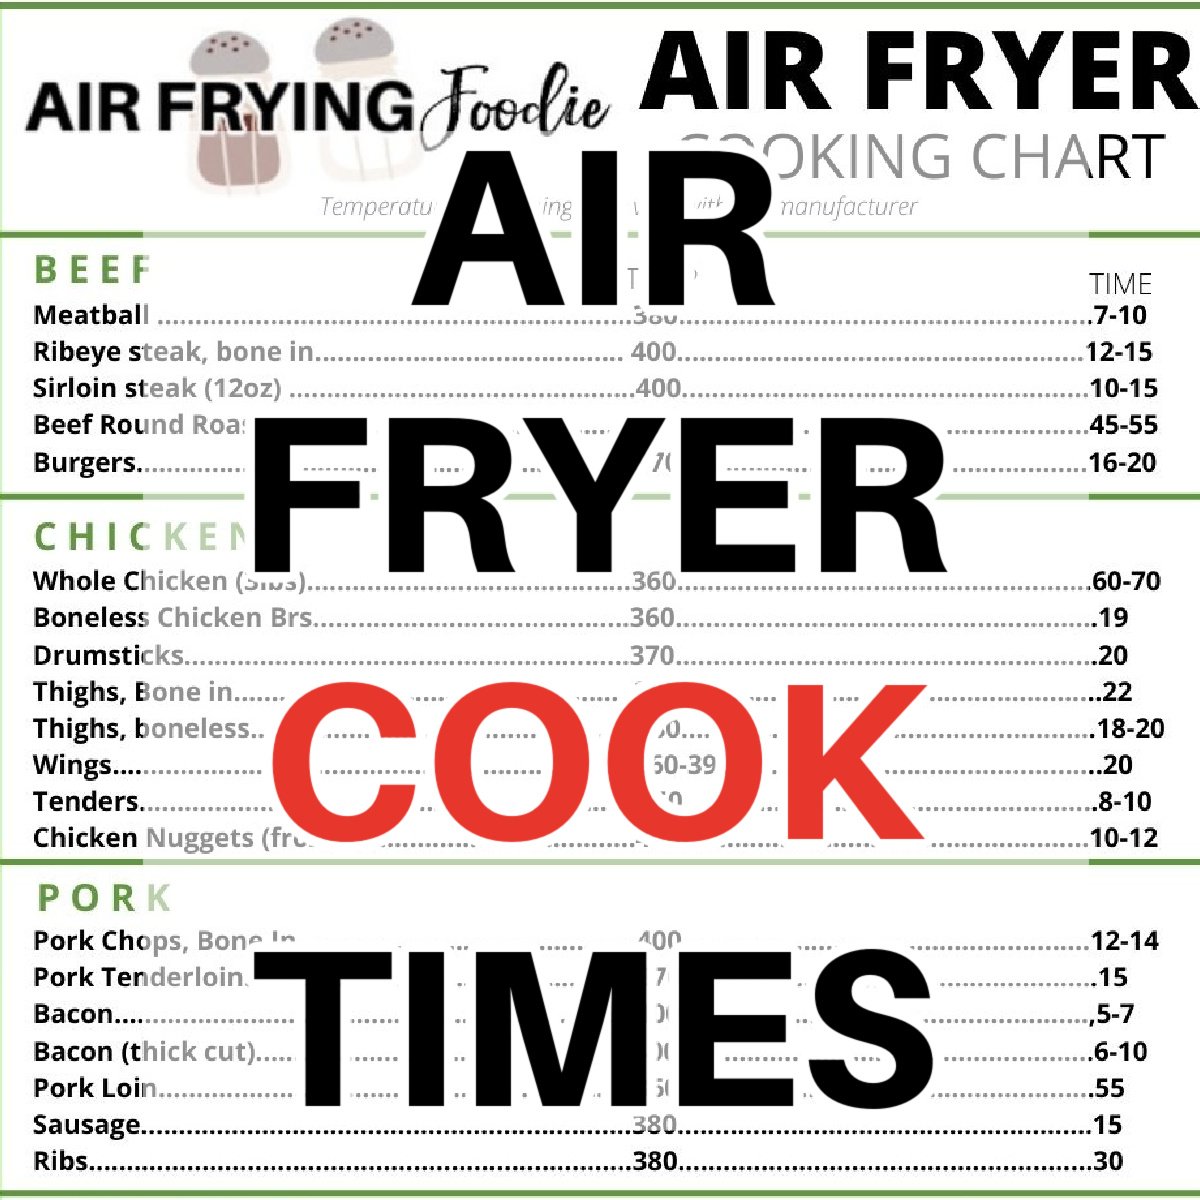 Air Fryer Cook Times overlaid the air fryer cooking chart.